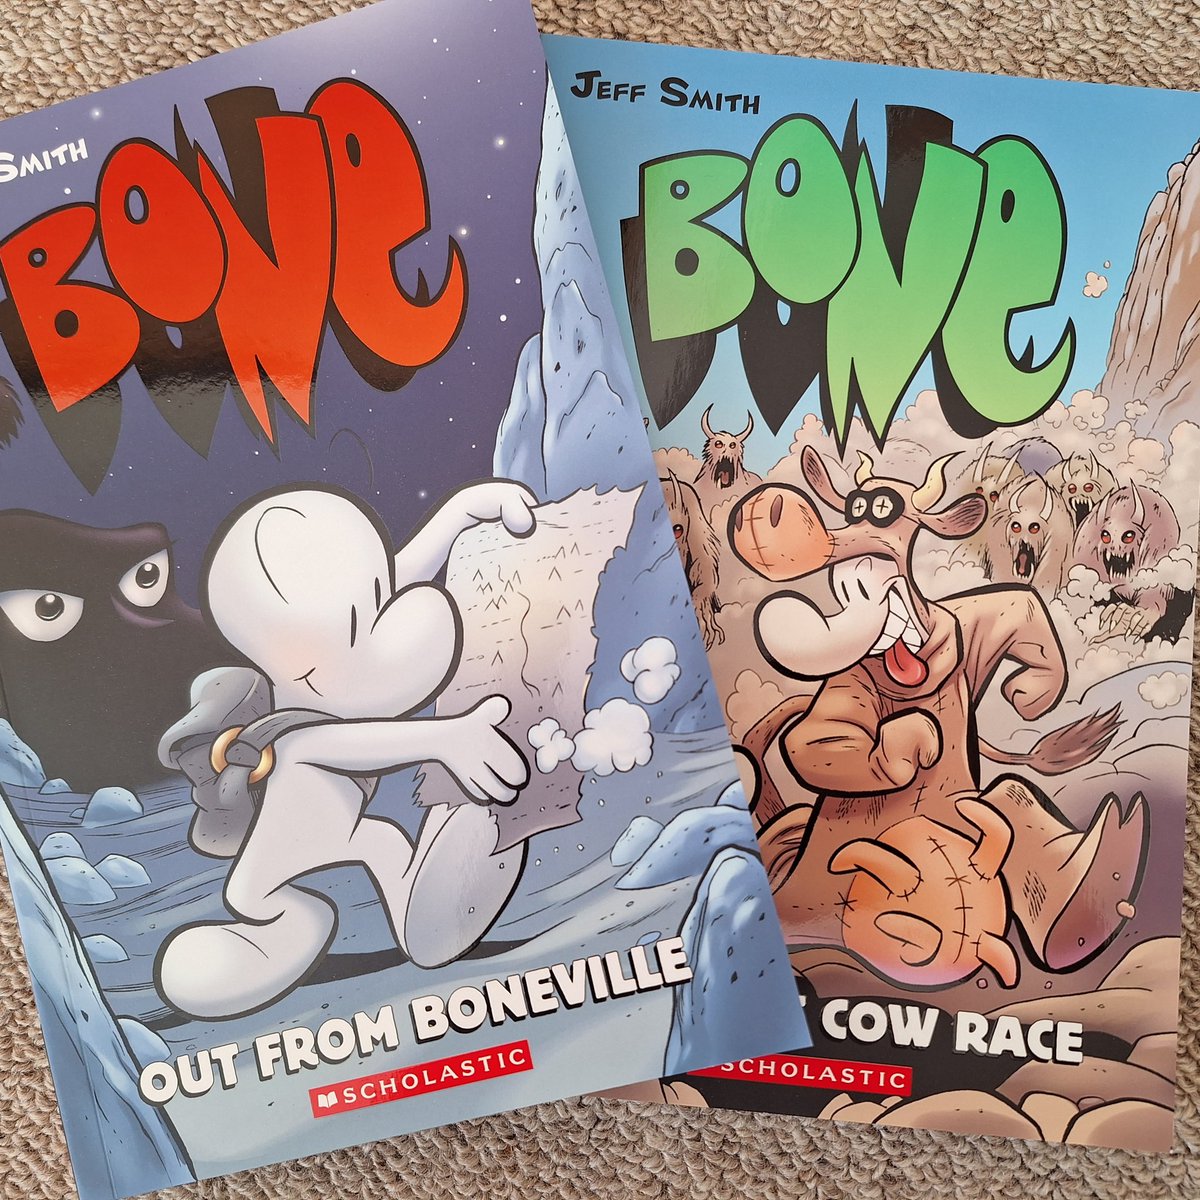 Well look what just turned up in the mail! 
I have the one volume edition but it's a bit unwieldy for casual reading, so I'm gonna try get all the colour volumes as well.
#bone #graphicnovel #comics #jeffsmith